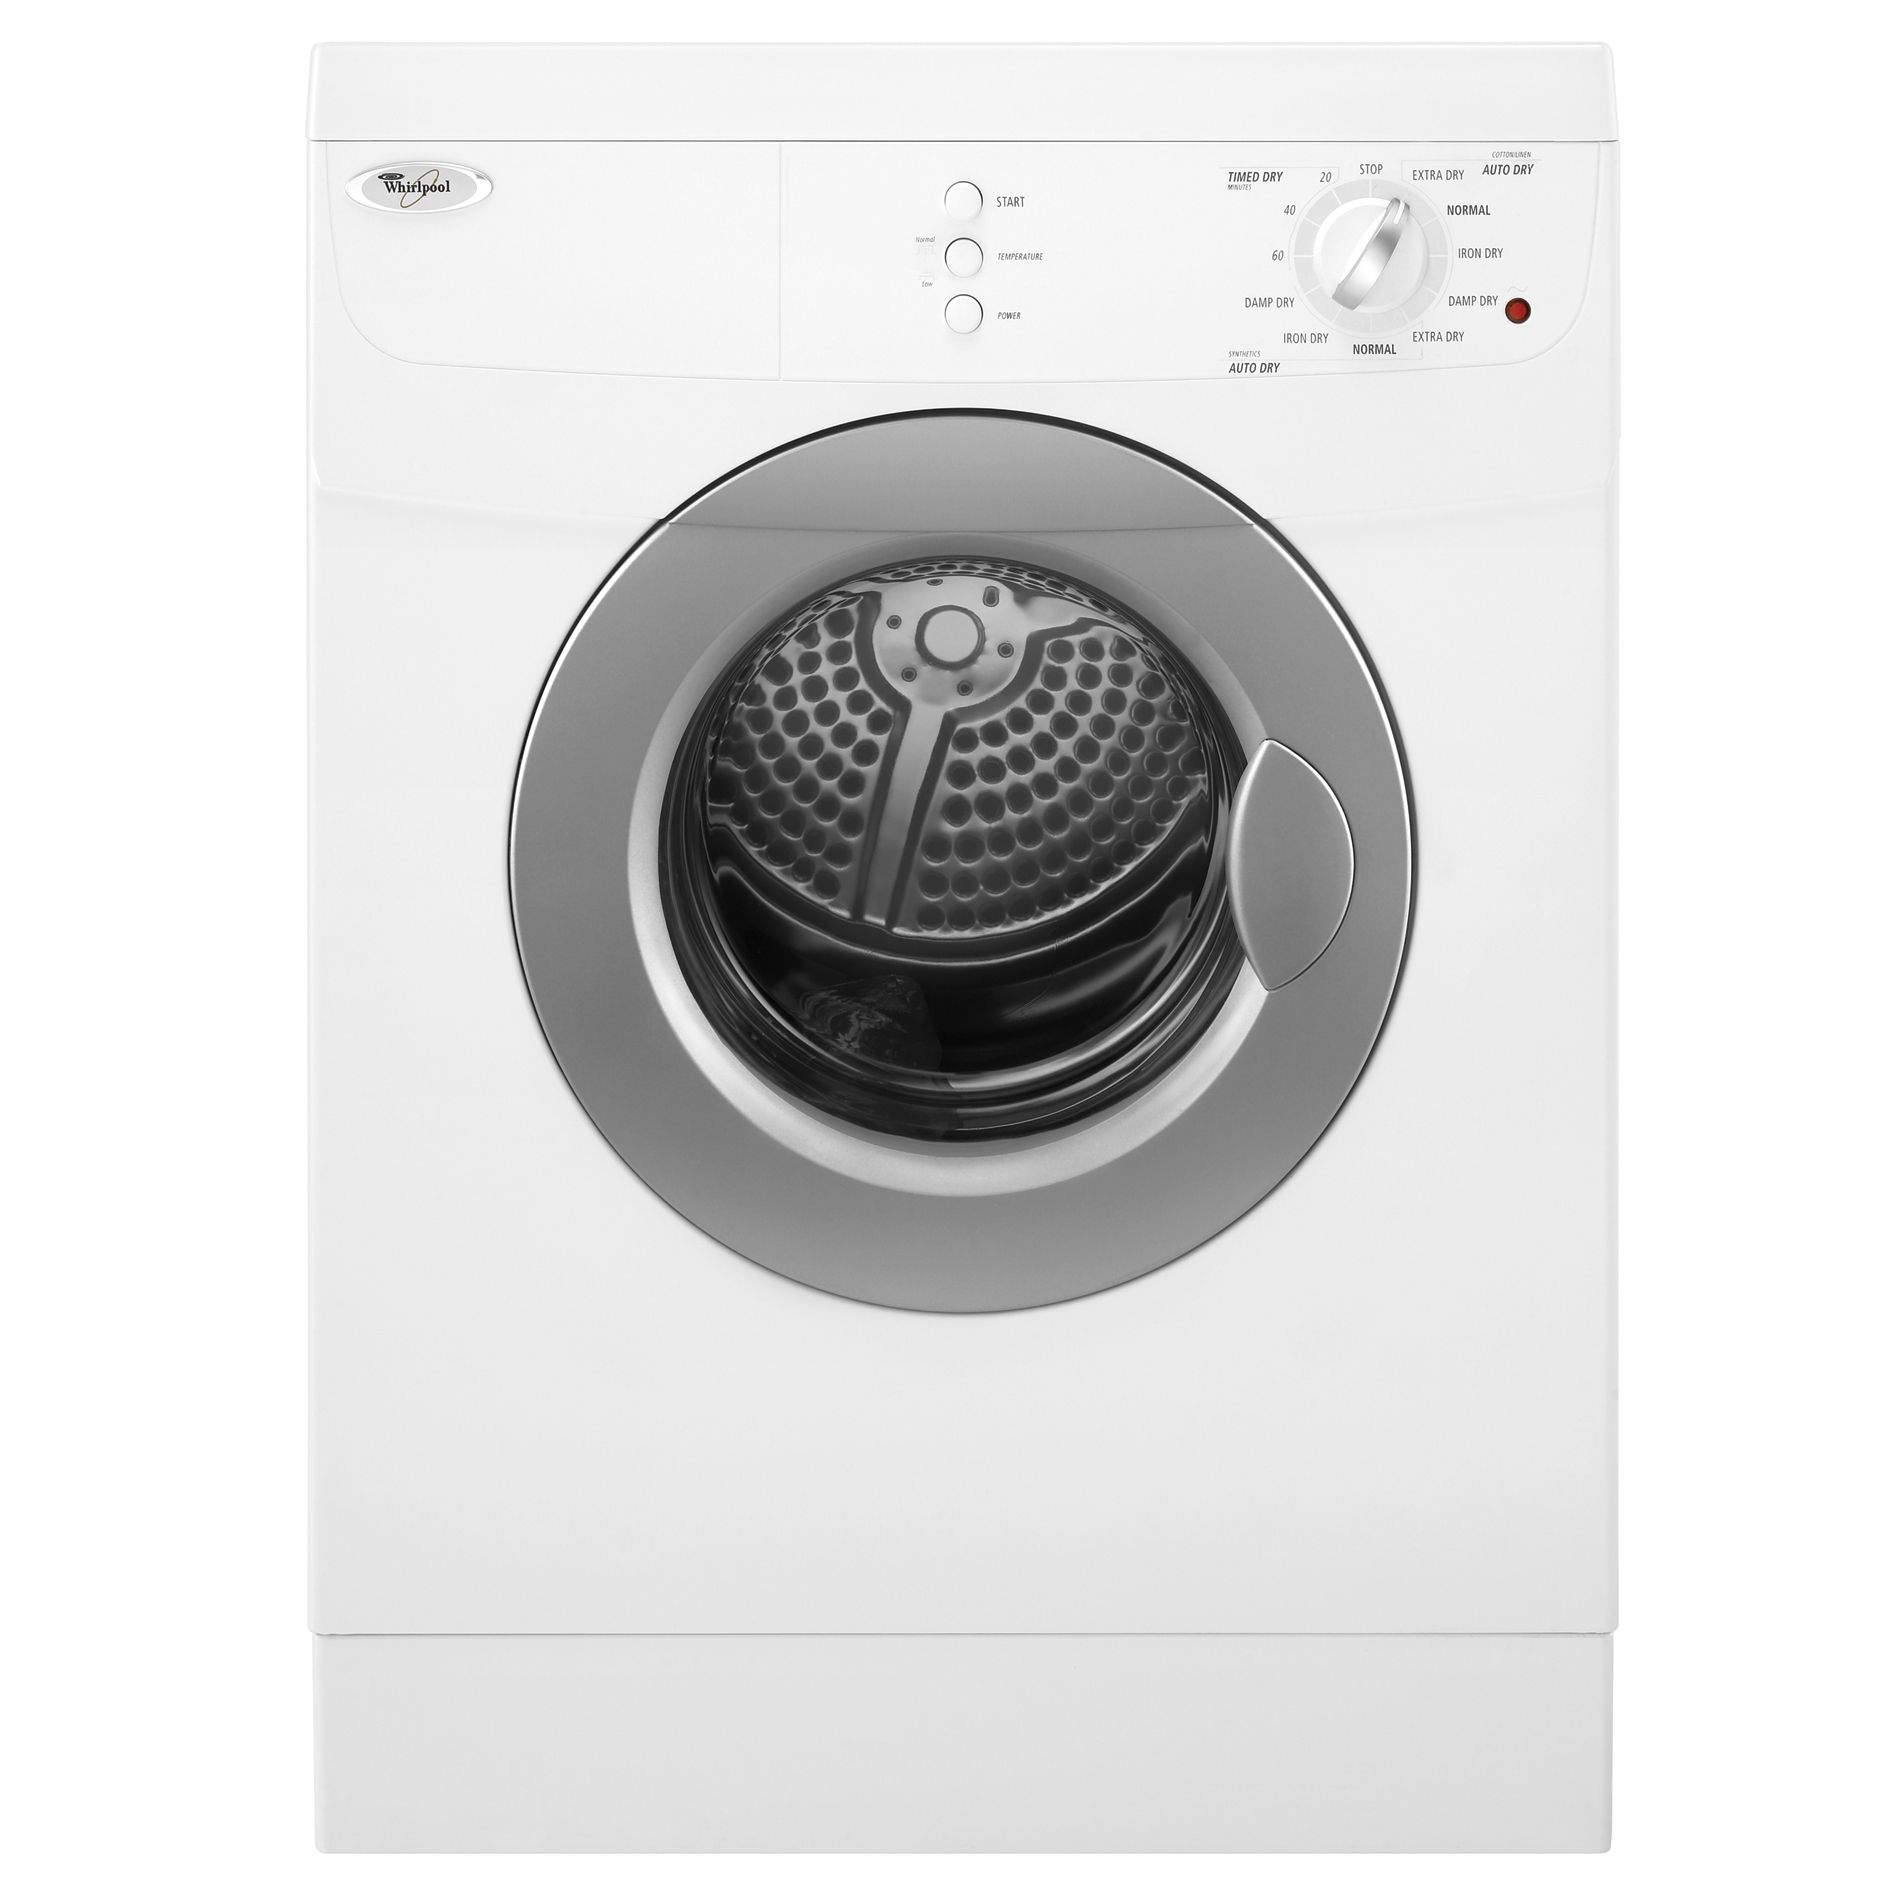 Whirlpool 3.8 cu. ft. Electric Compact Dryer White Less than 4 cu. ft.